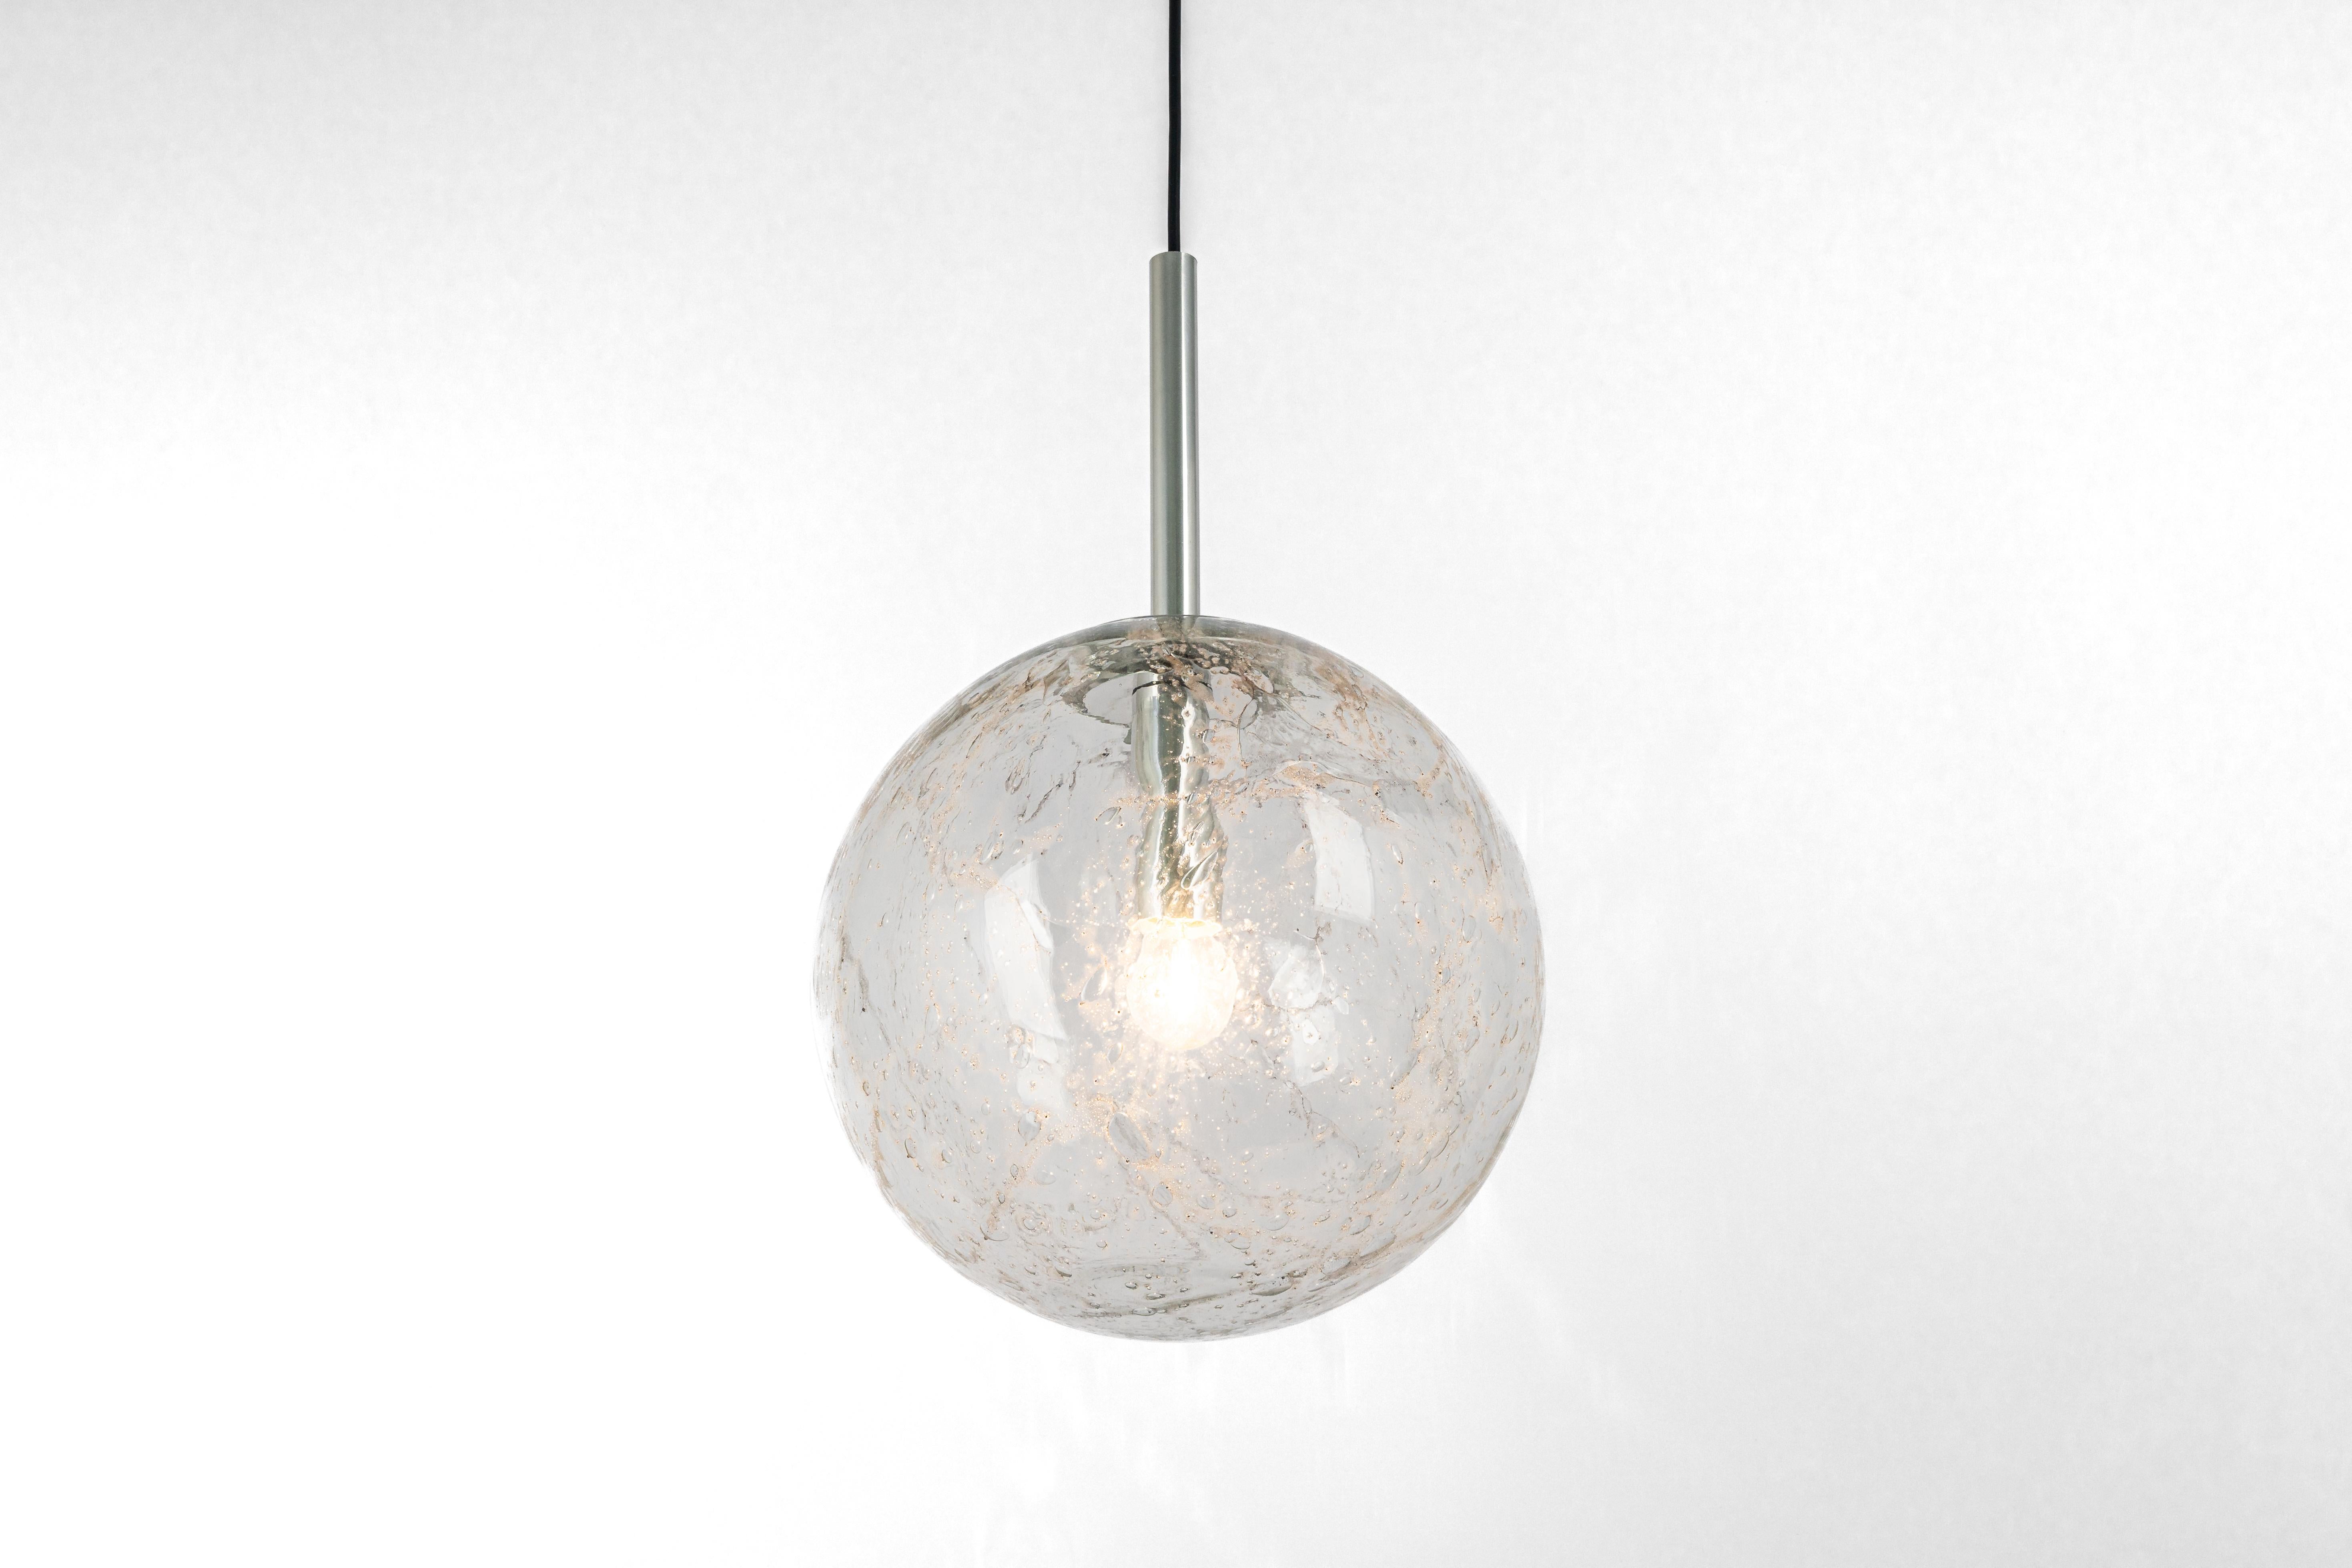 Large Murano Ball Pendant Light by Doria, Germany, 1970s For Sale 2